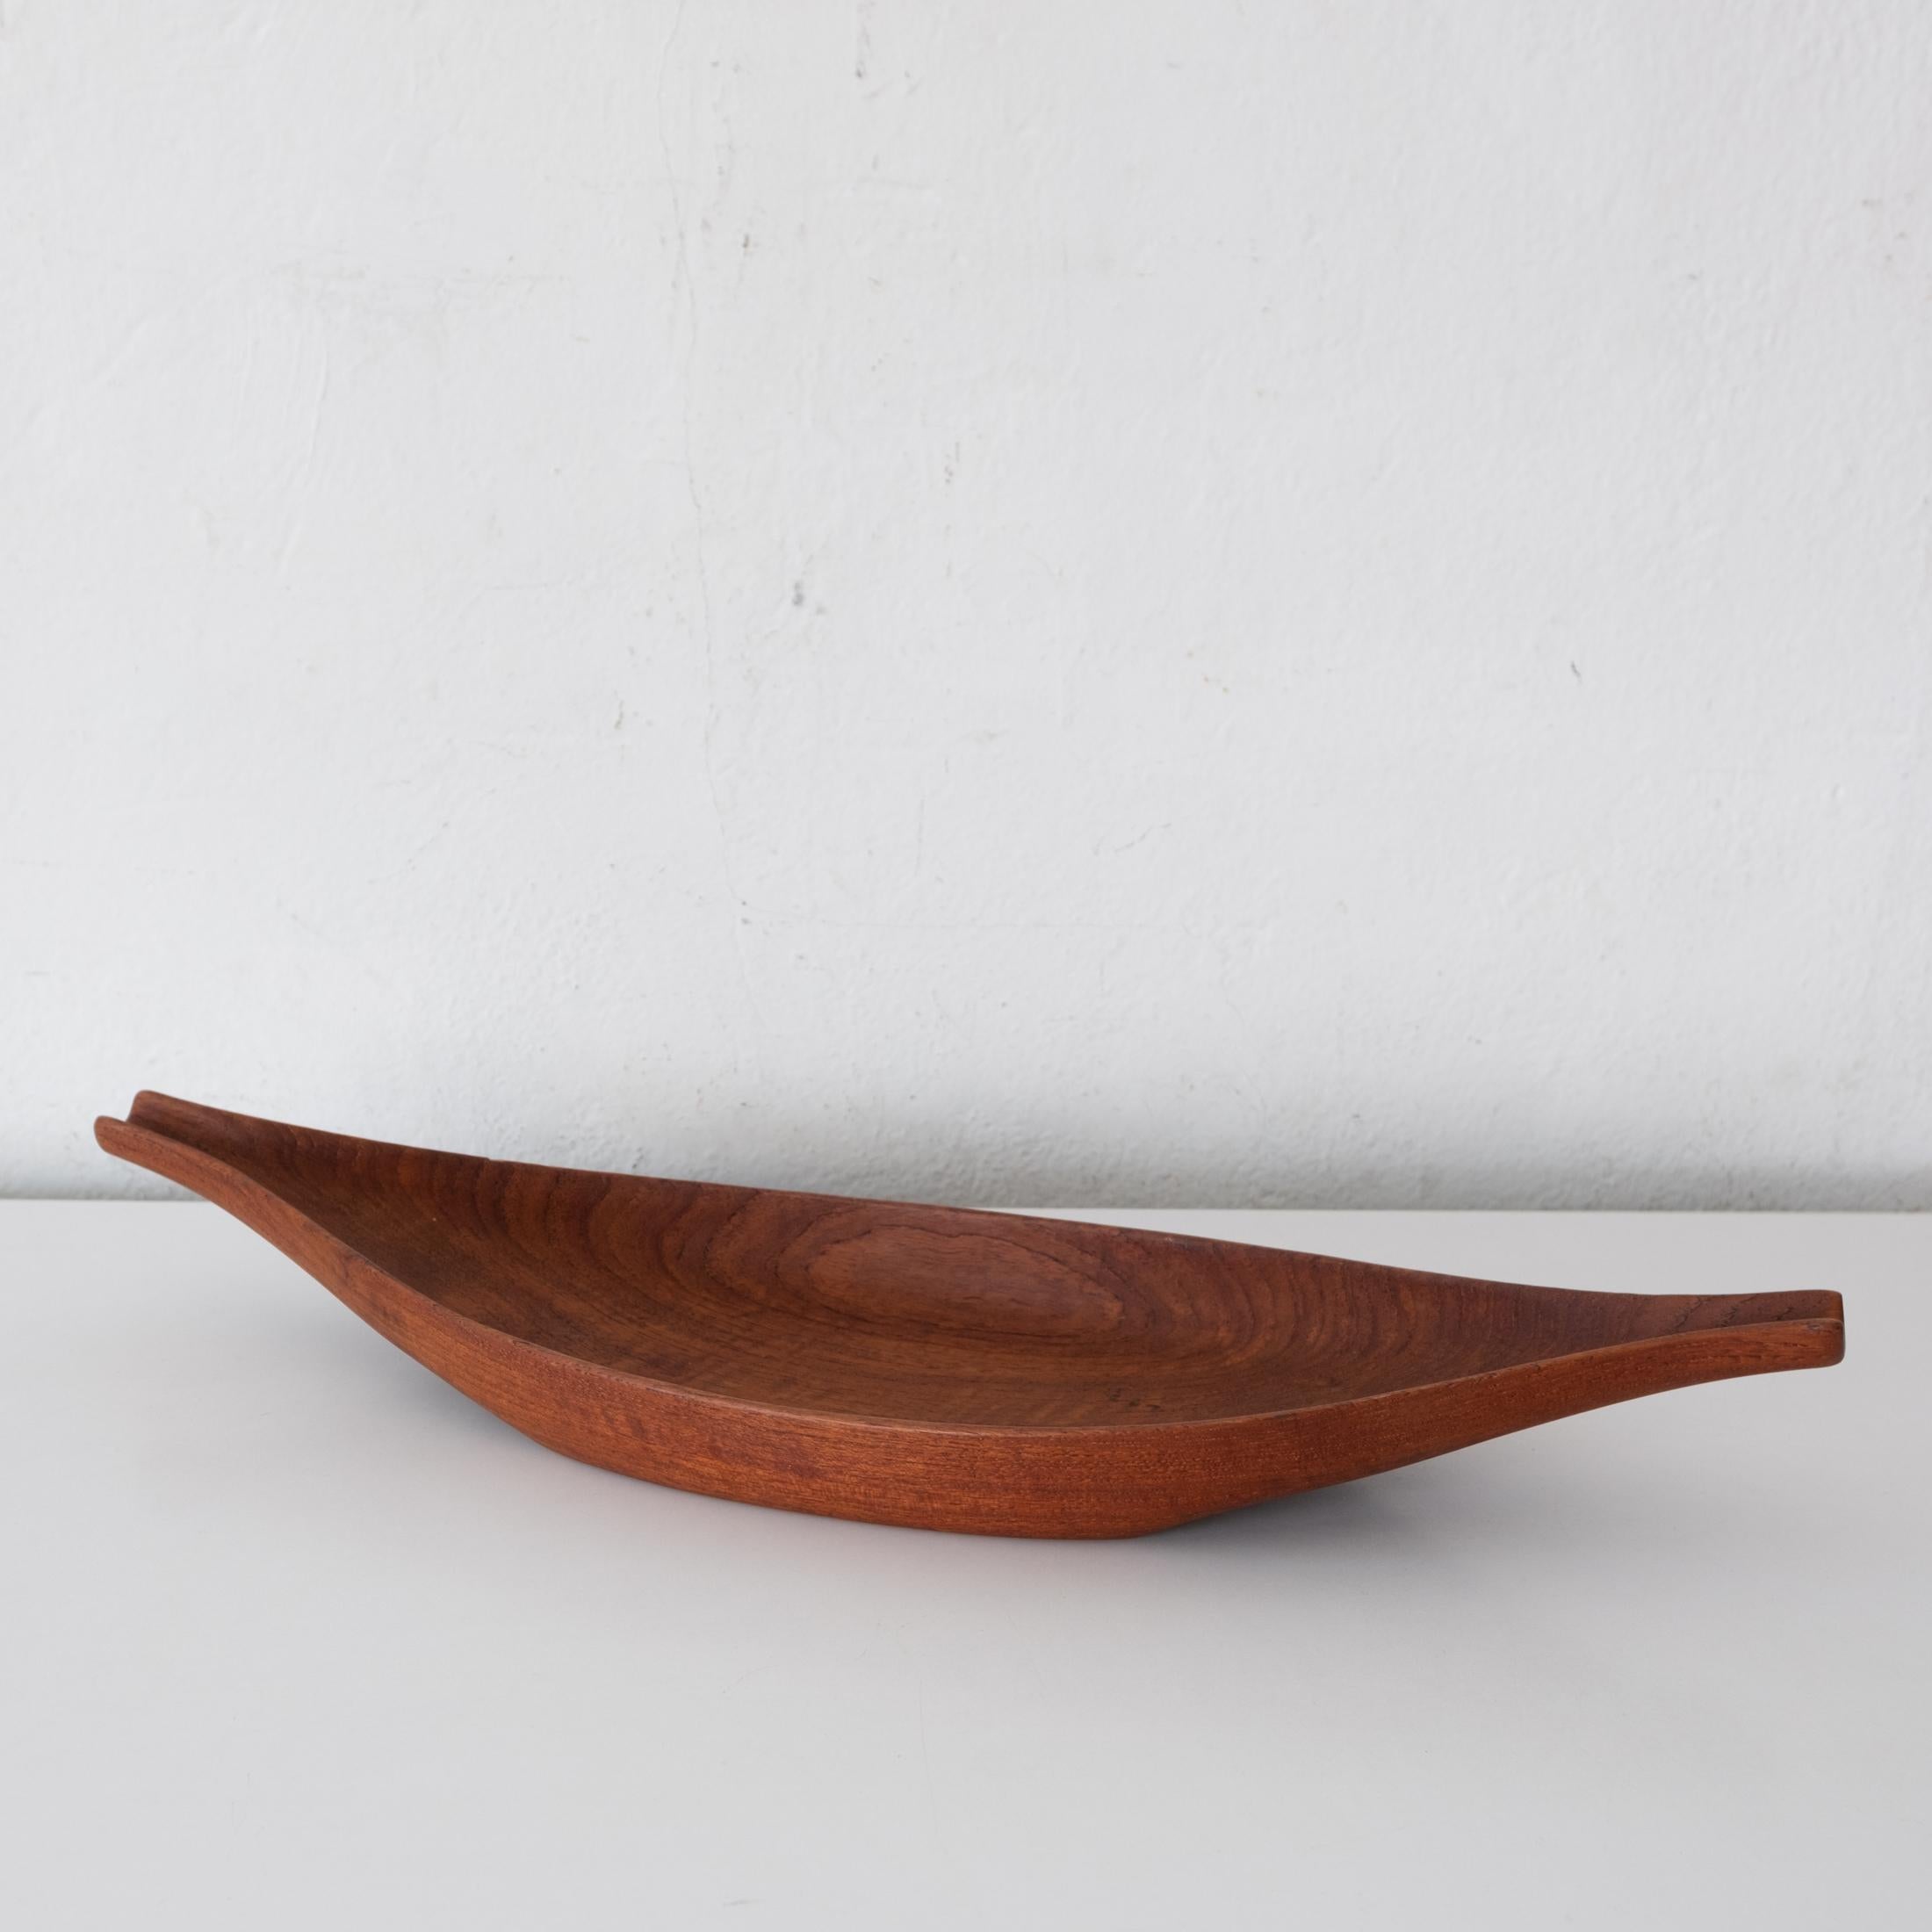 Sculptural Midcentury Italian Wood Fruit Bowl or Catch All by Anri, 1950s For Sale 5